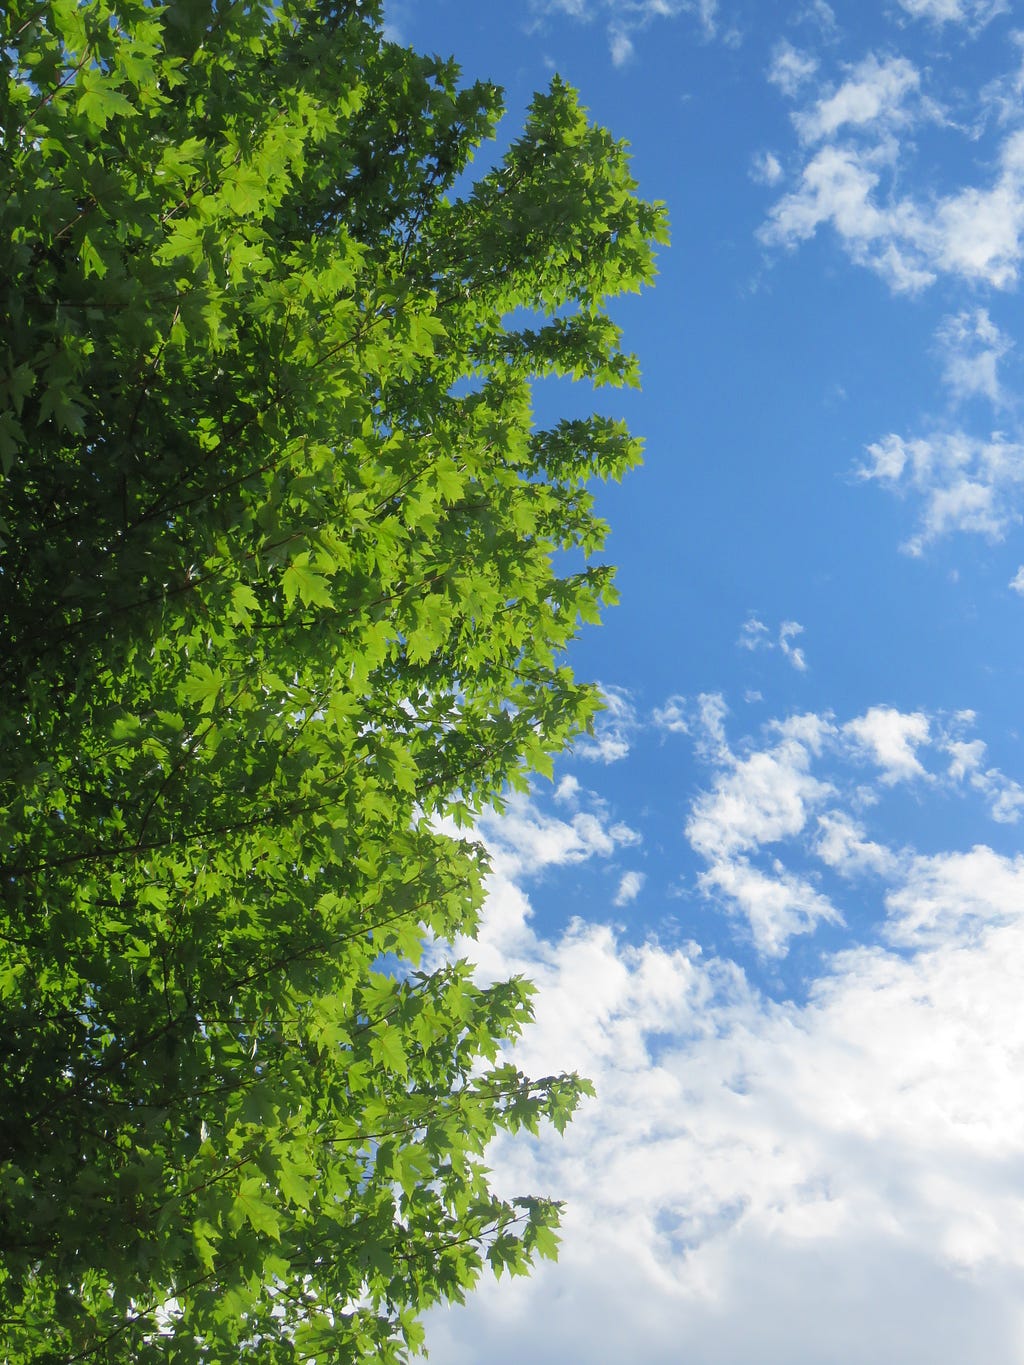 A big, bold, beautiful green tree against a wondrous blue sky with little white clouds. I took the picture myself. God bless you and I love you so much!